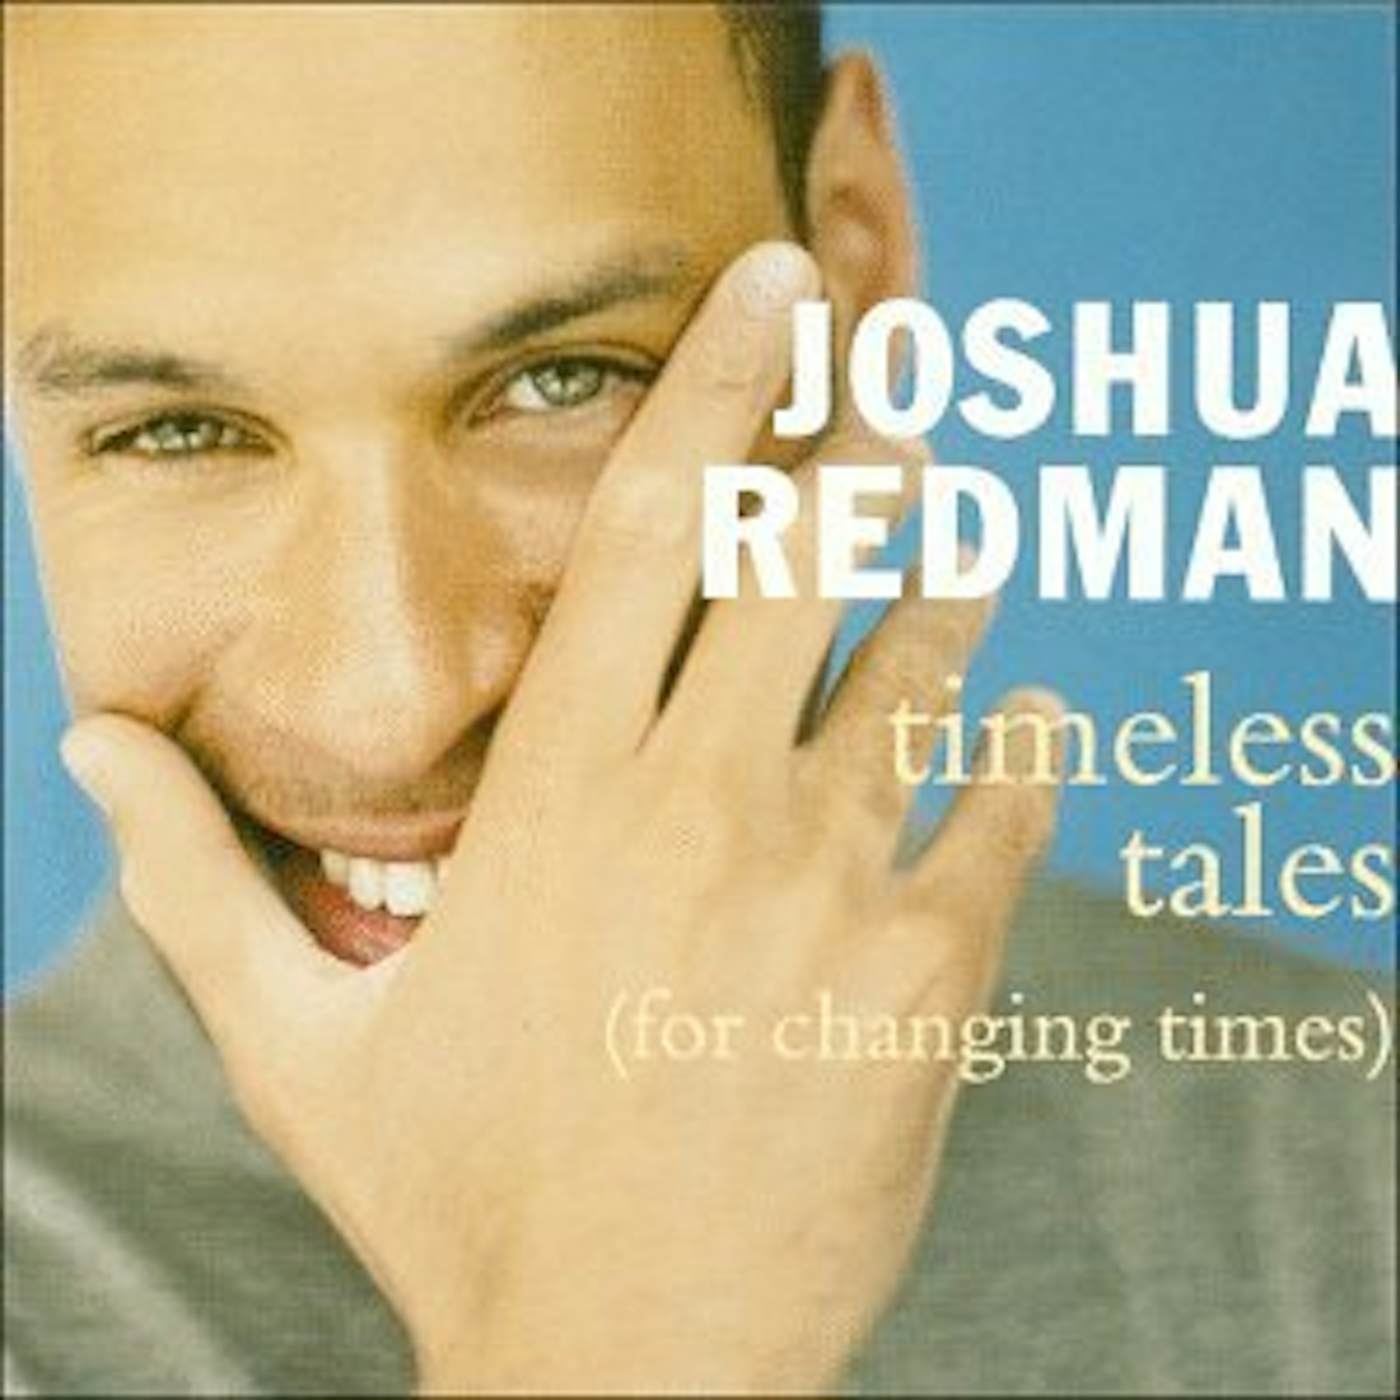 Joshua Redman TIMELESS TALES (FOR CHANGING TIMES) CD